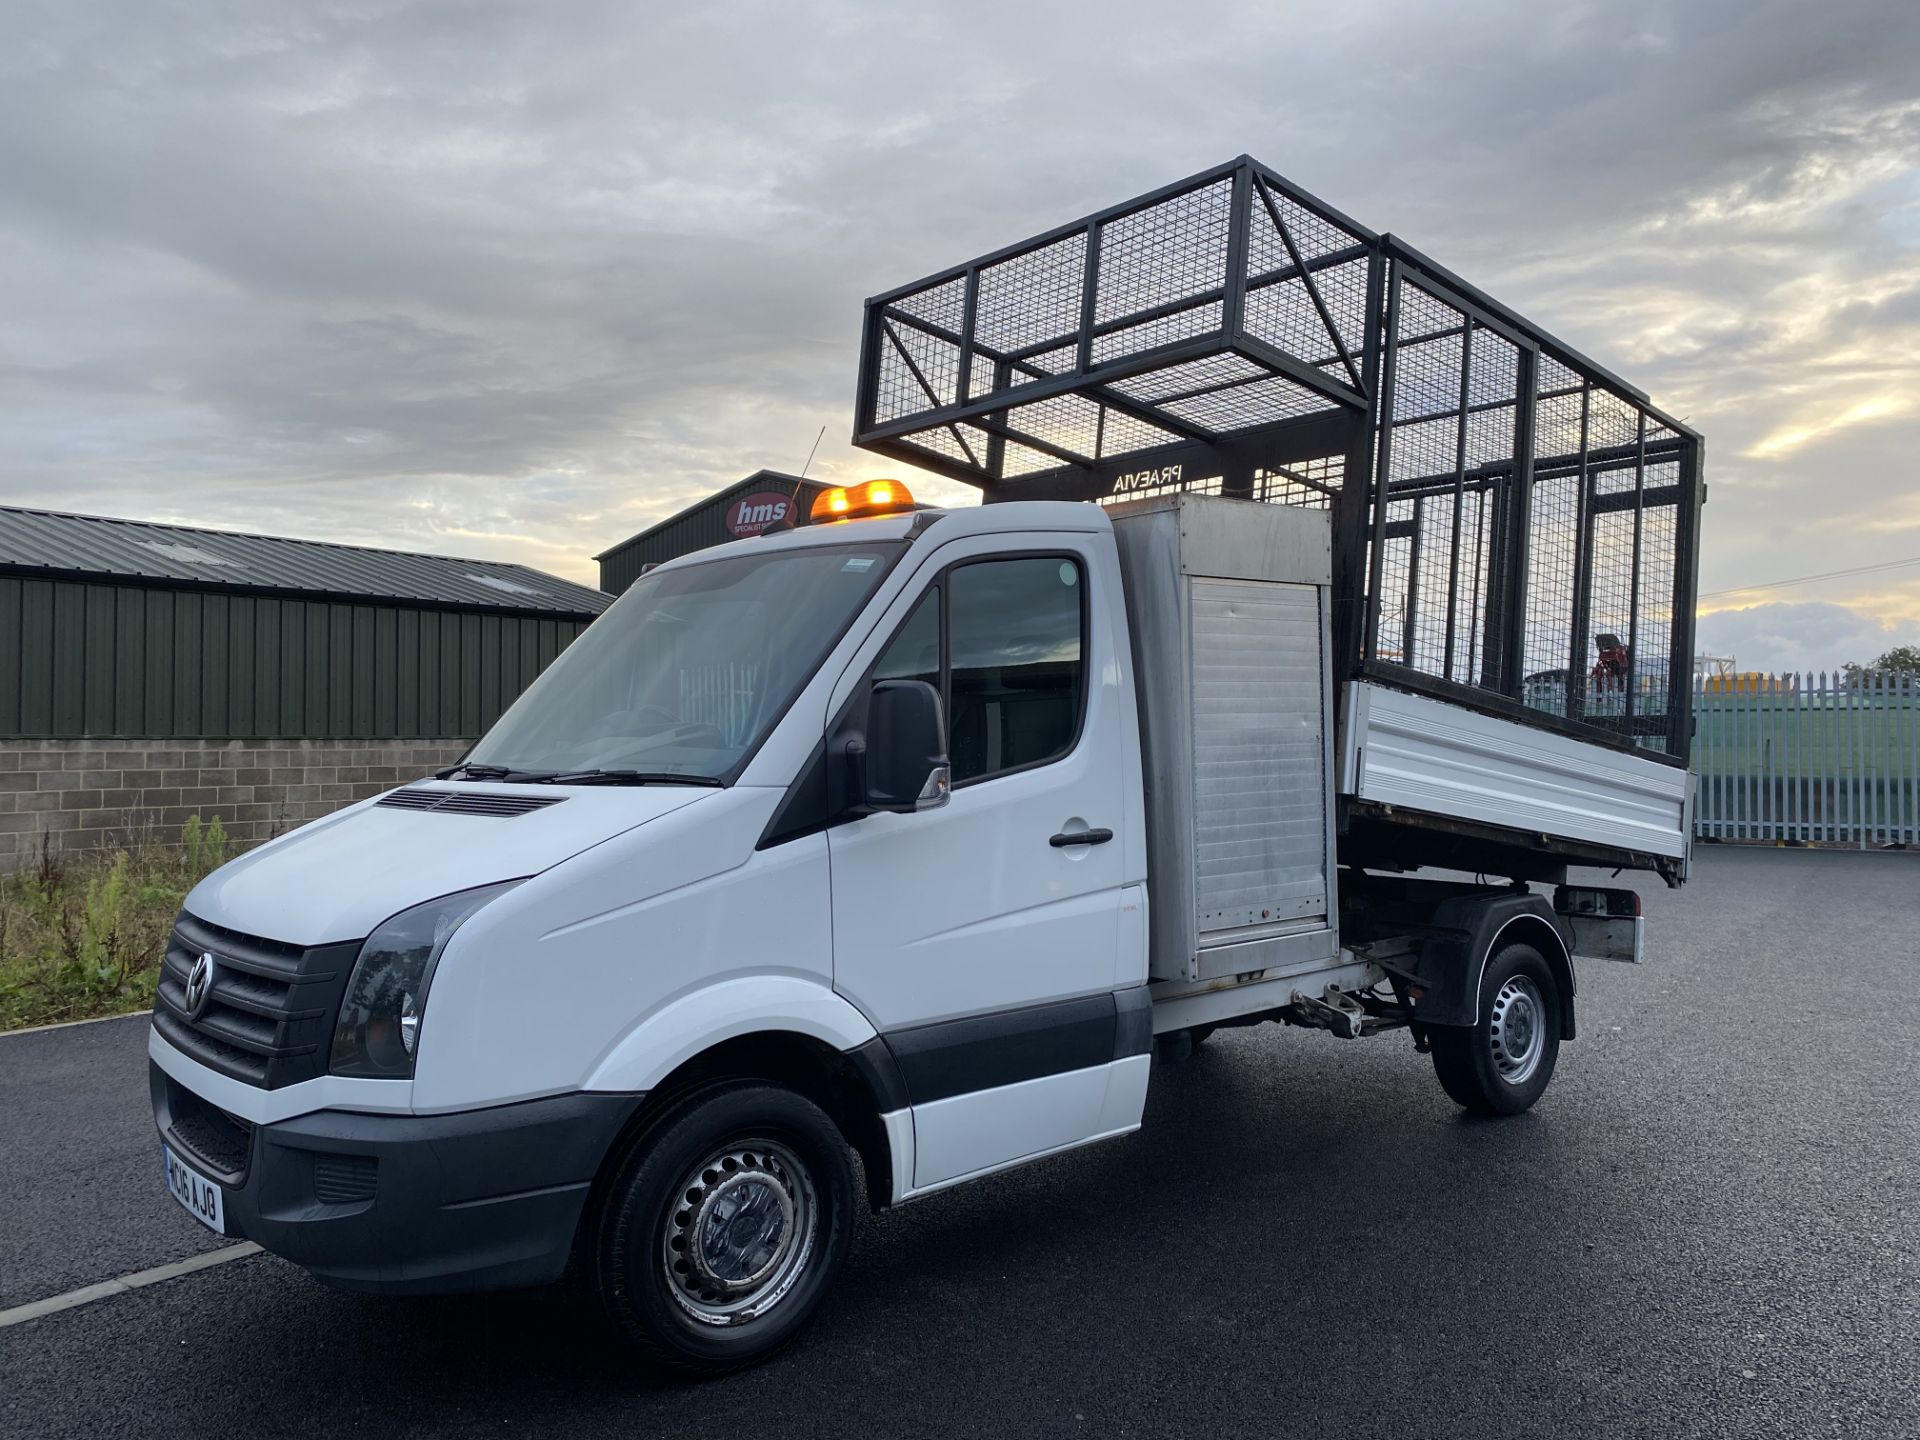 (On Sale) VOLKSWAGEN CRAFTER CR35 2.0TDI CAGED TIPPER TRUCK - 16 REG - ONLY 35K MILES - 1 OWNER - Image 4 of 8